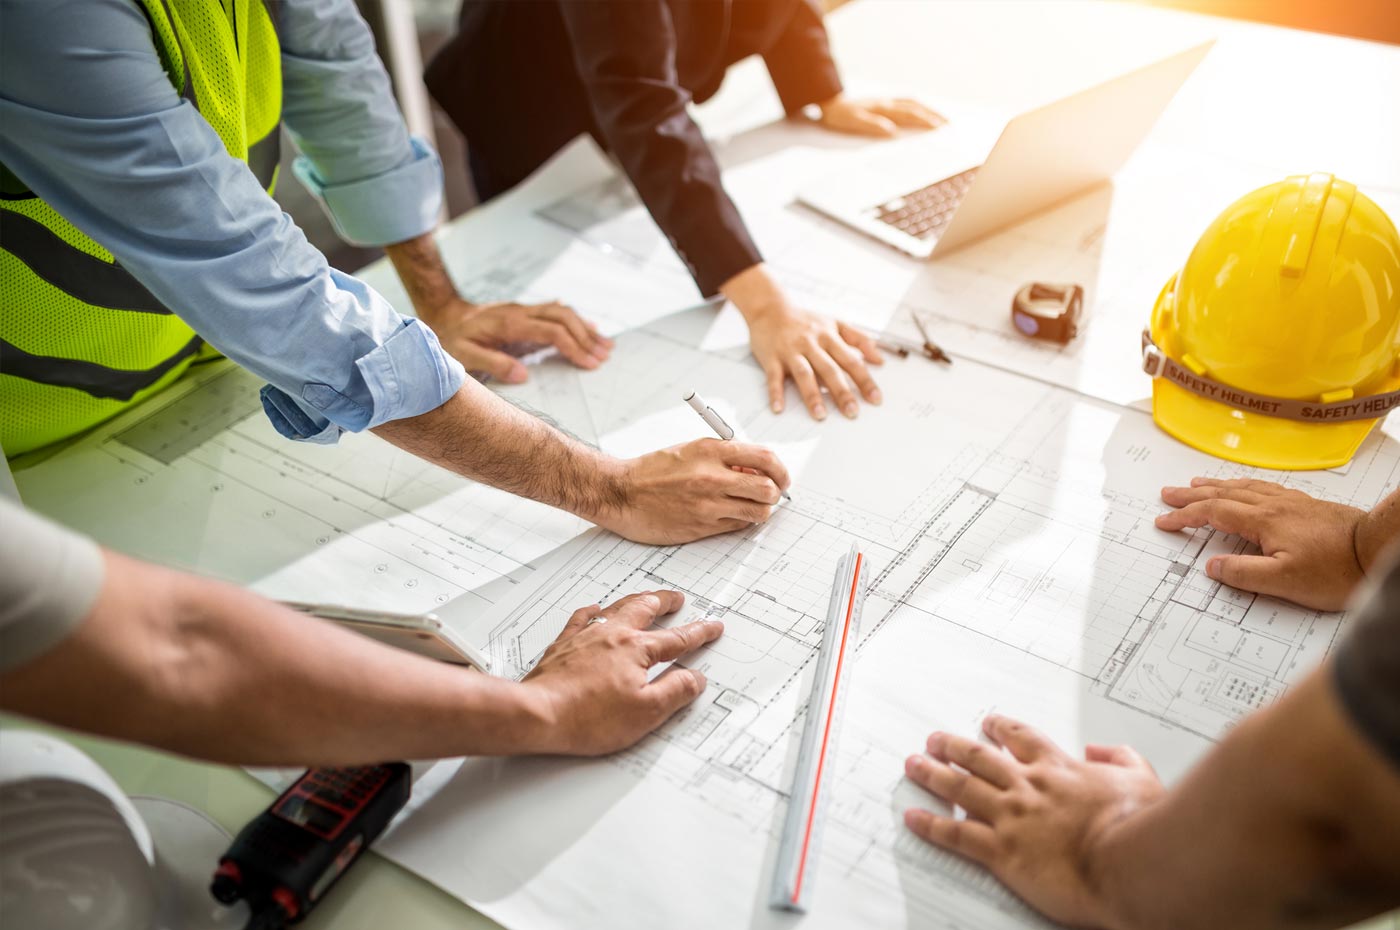 Construction managers reviewing architectural plans